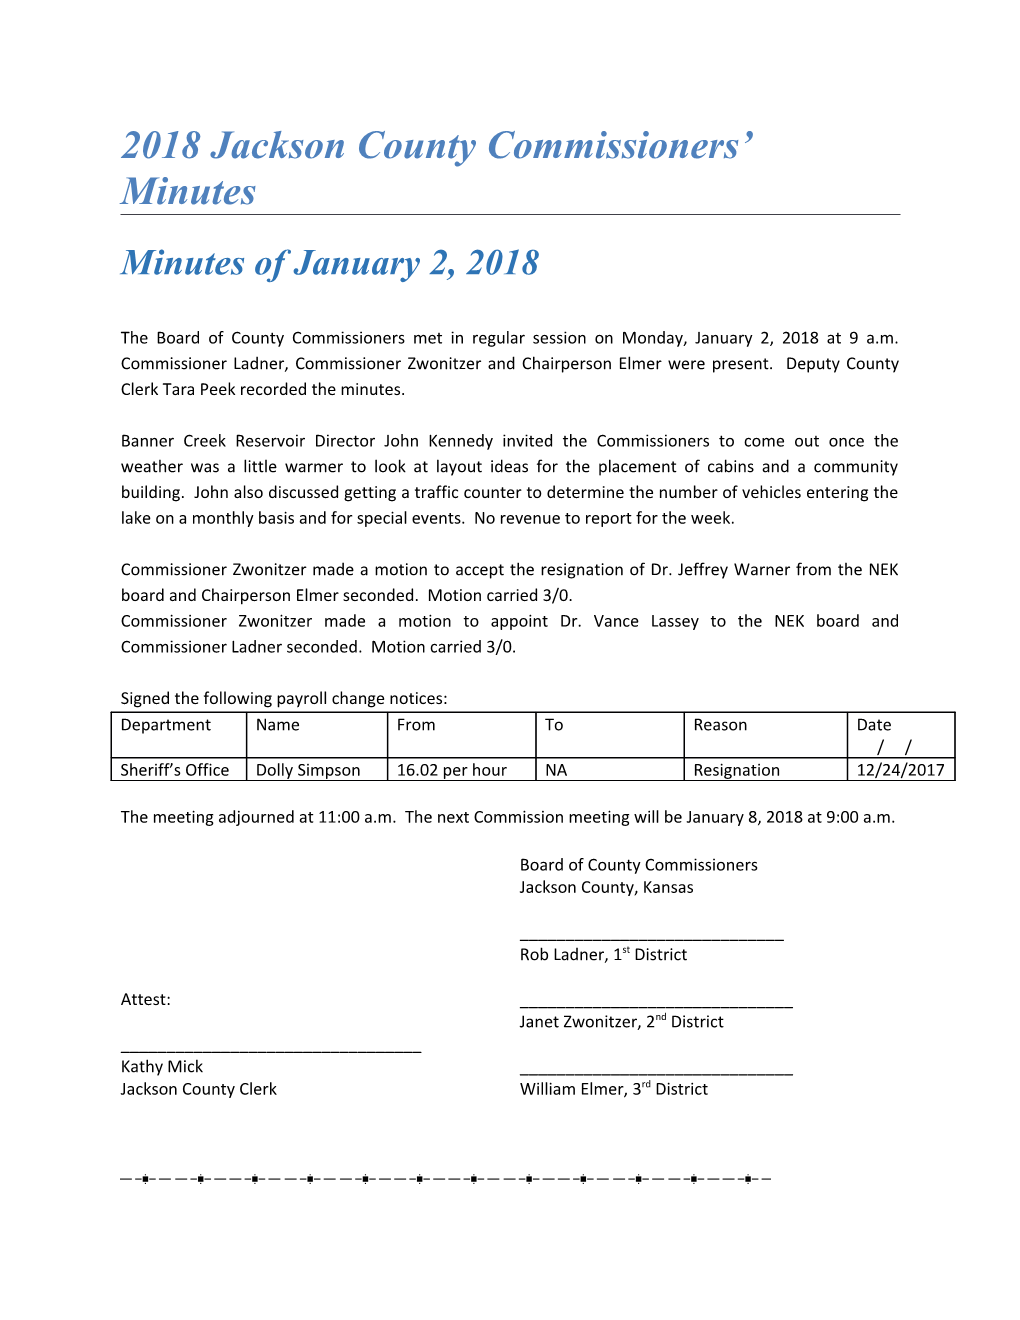 2018 Jackson County Commissioners Minutes